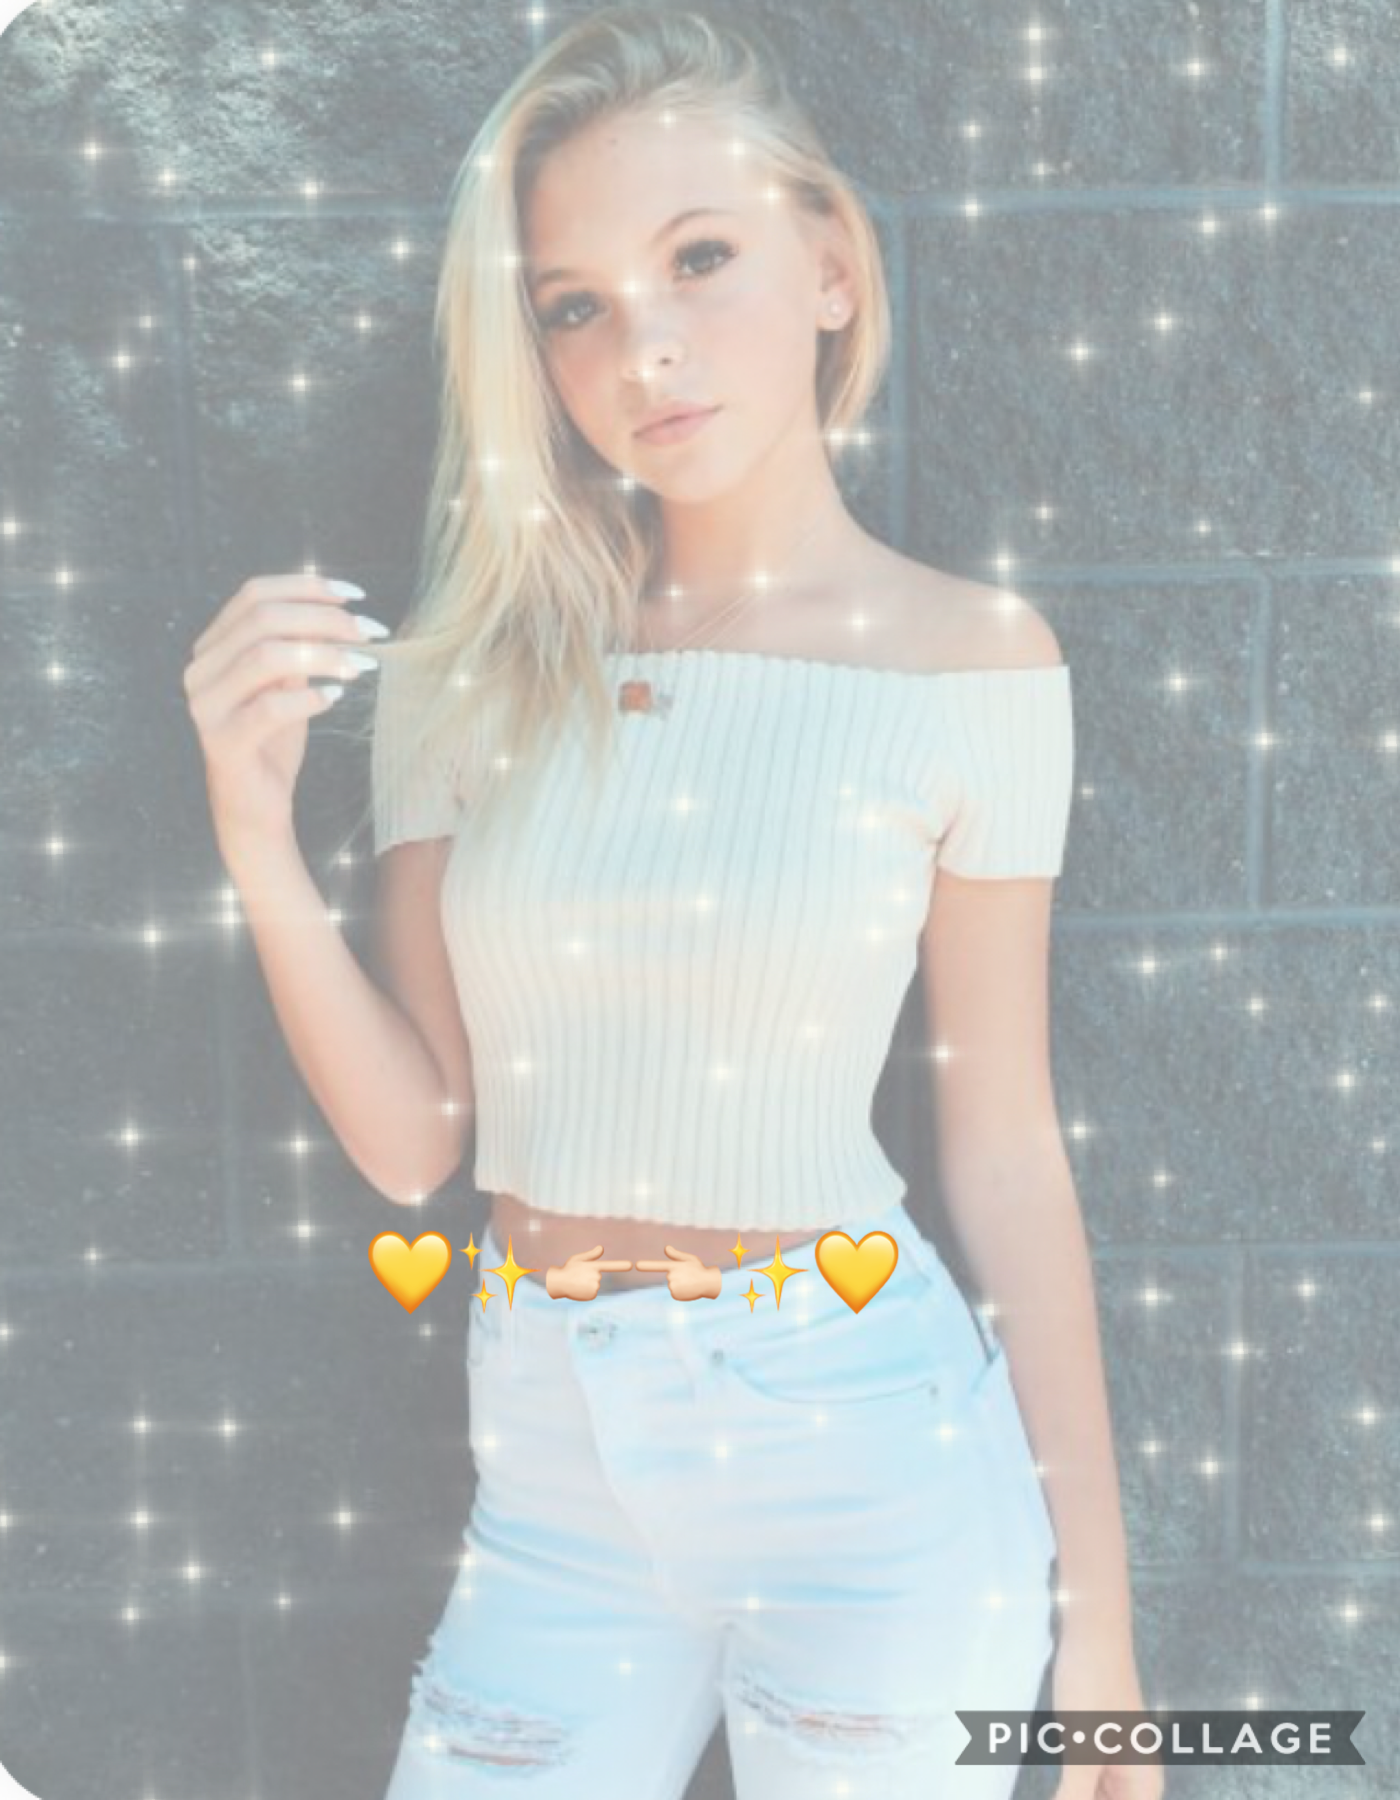 Tbh I don’t really like this one😕 Tell me if you like this one in the comments-💛✨Jordyn Jones✨💛